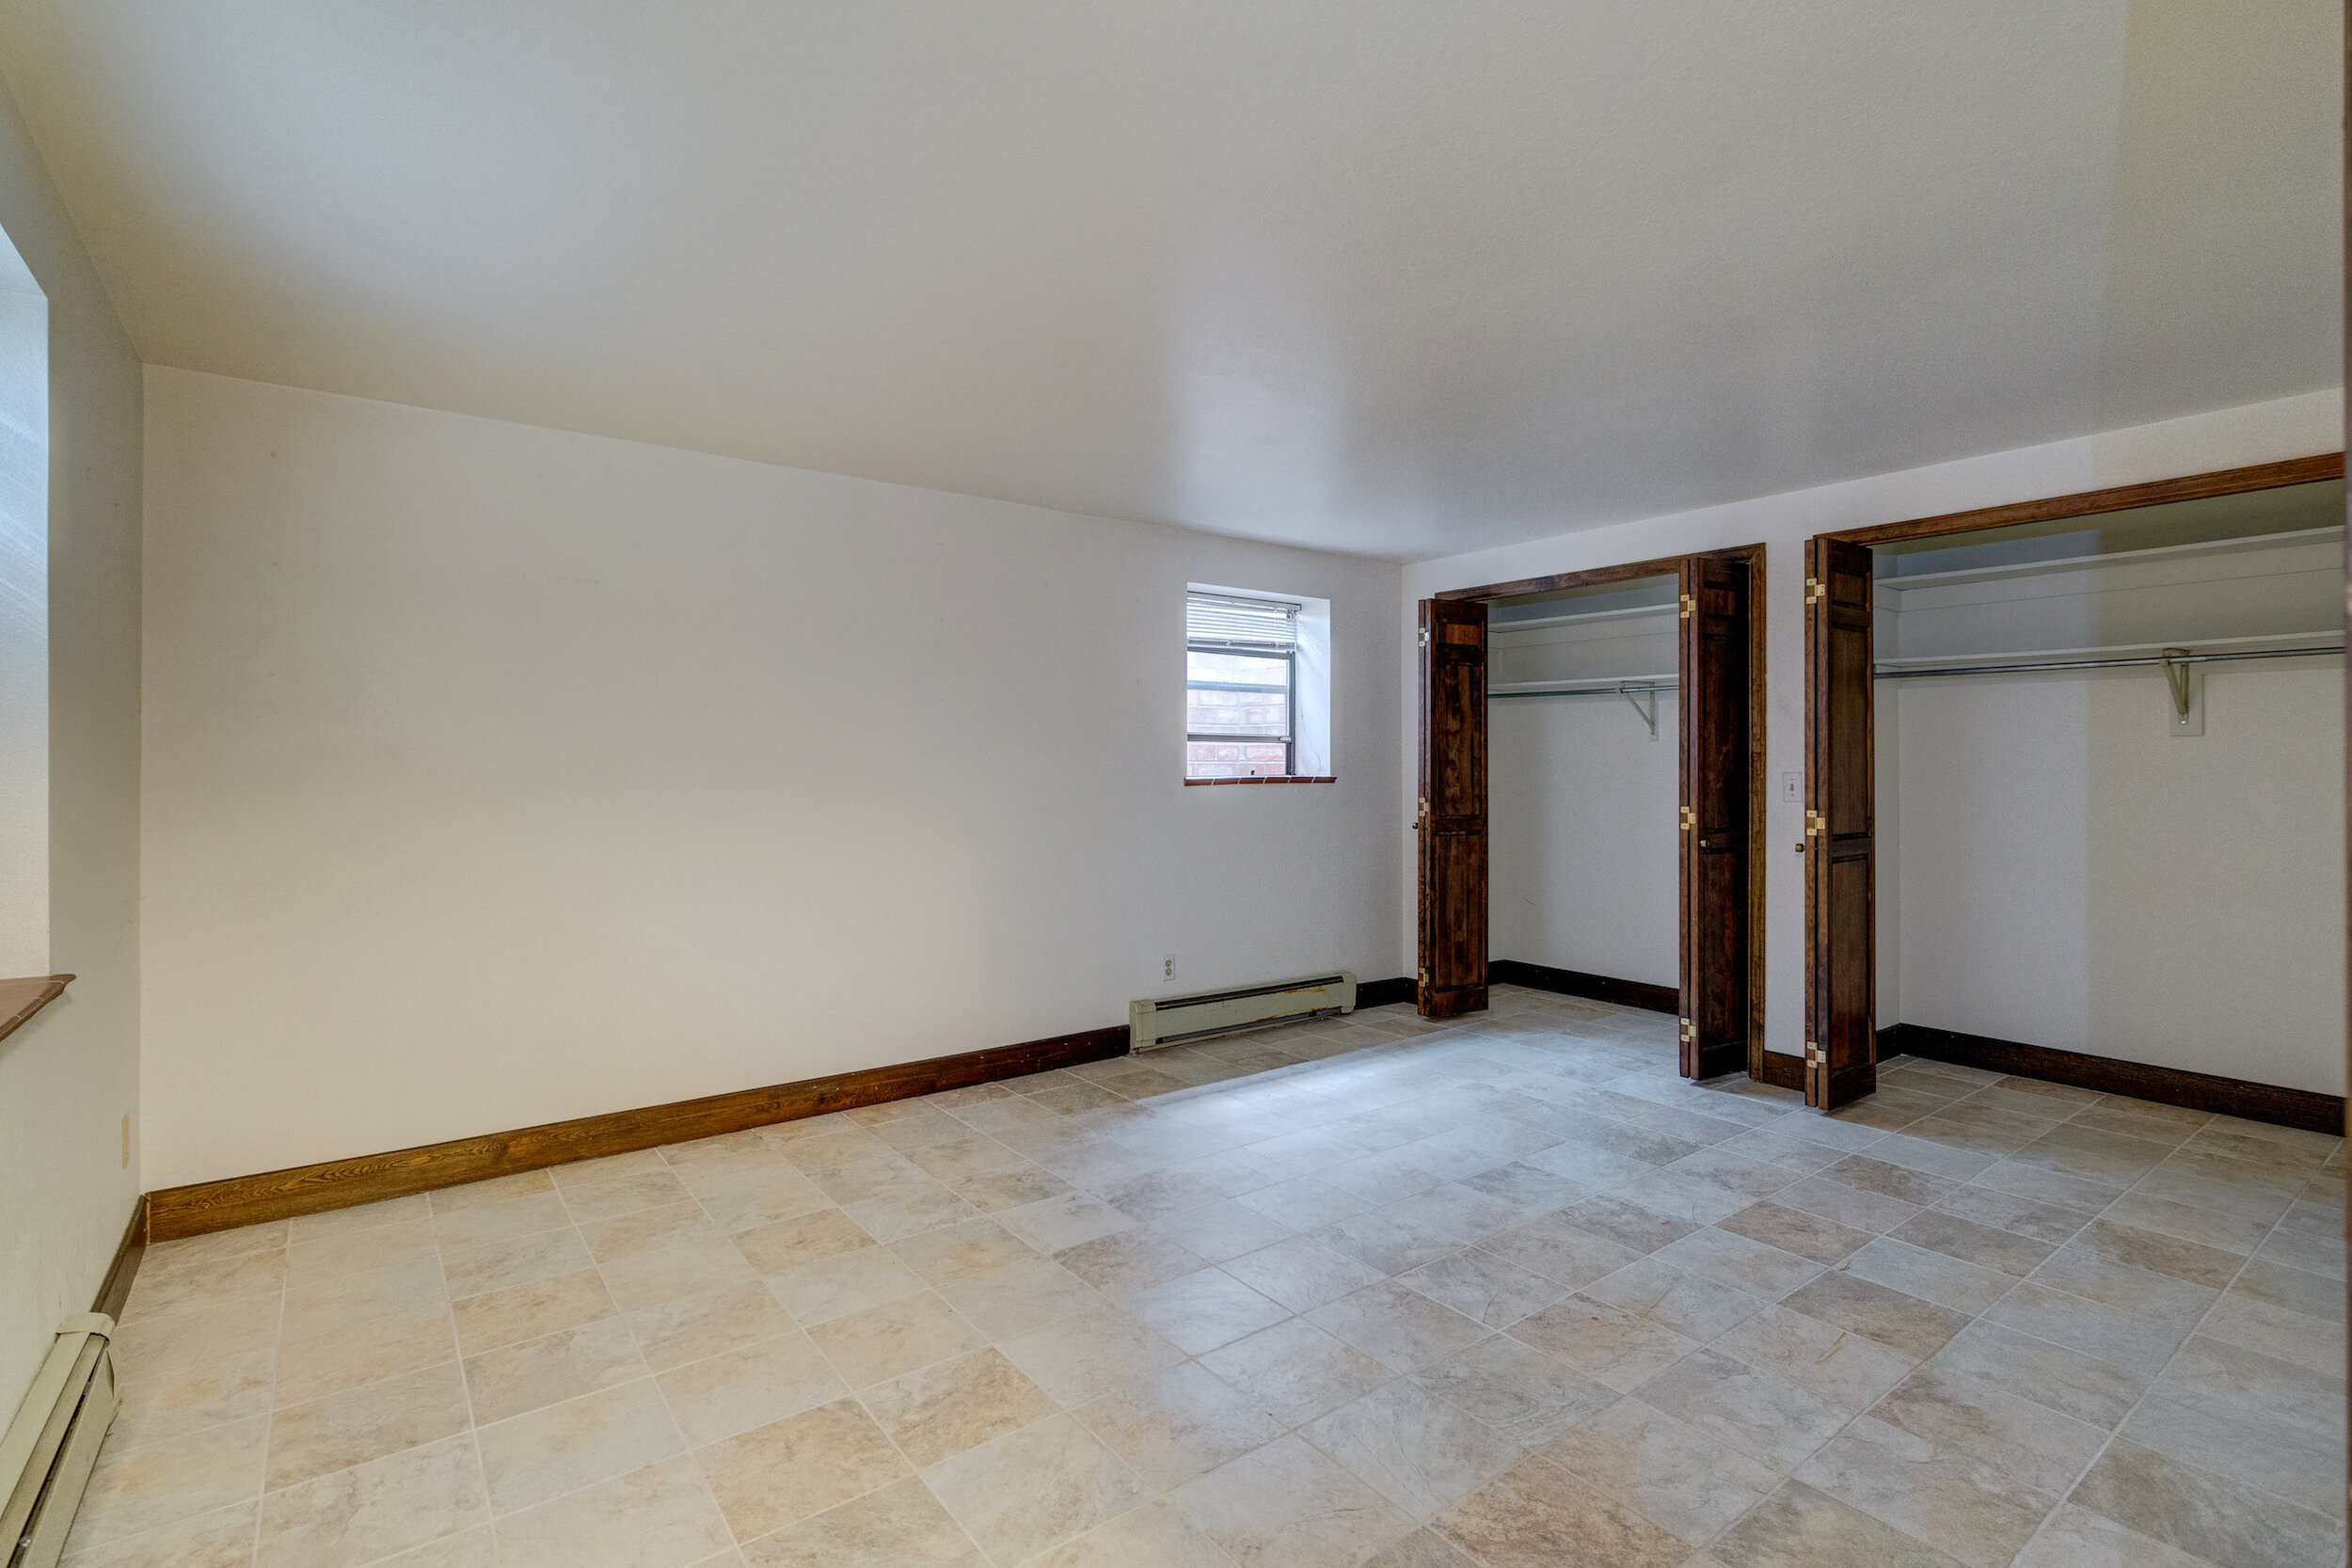 26-One of 2 guest bedrooms in basement. Both with tile floors.jpg